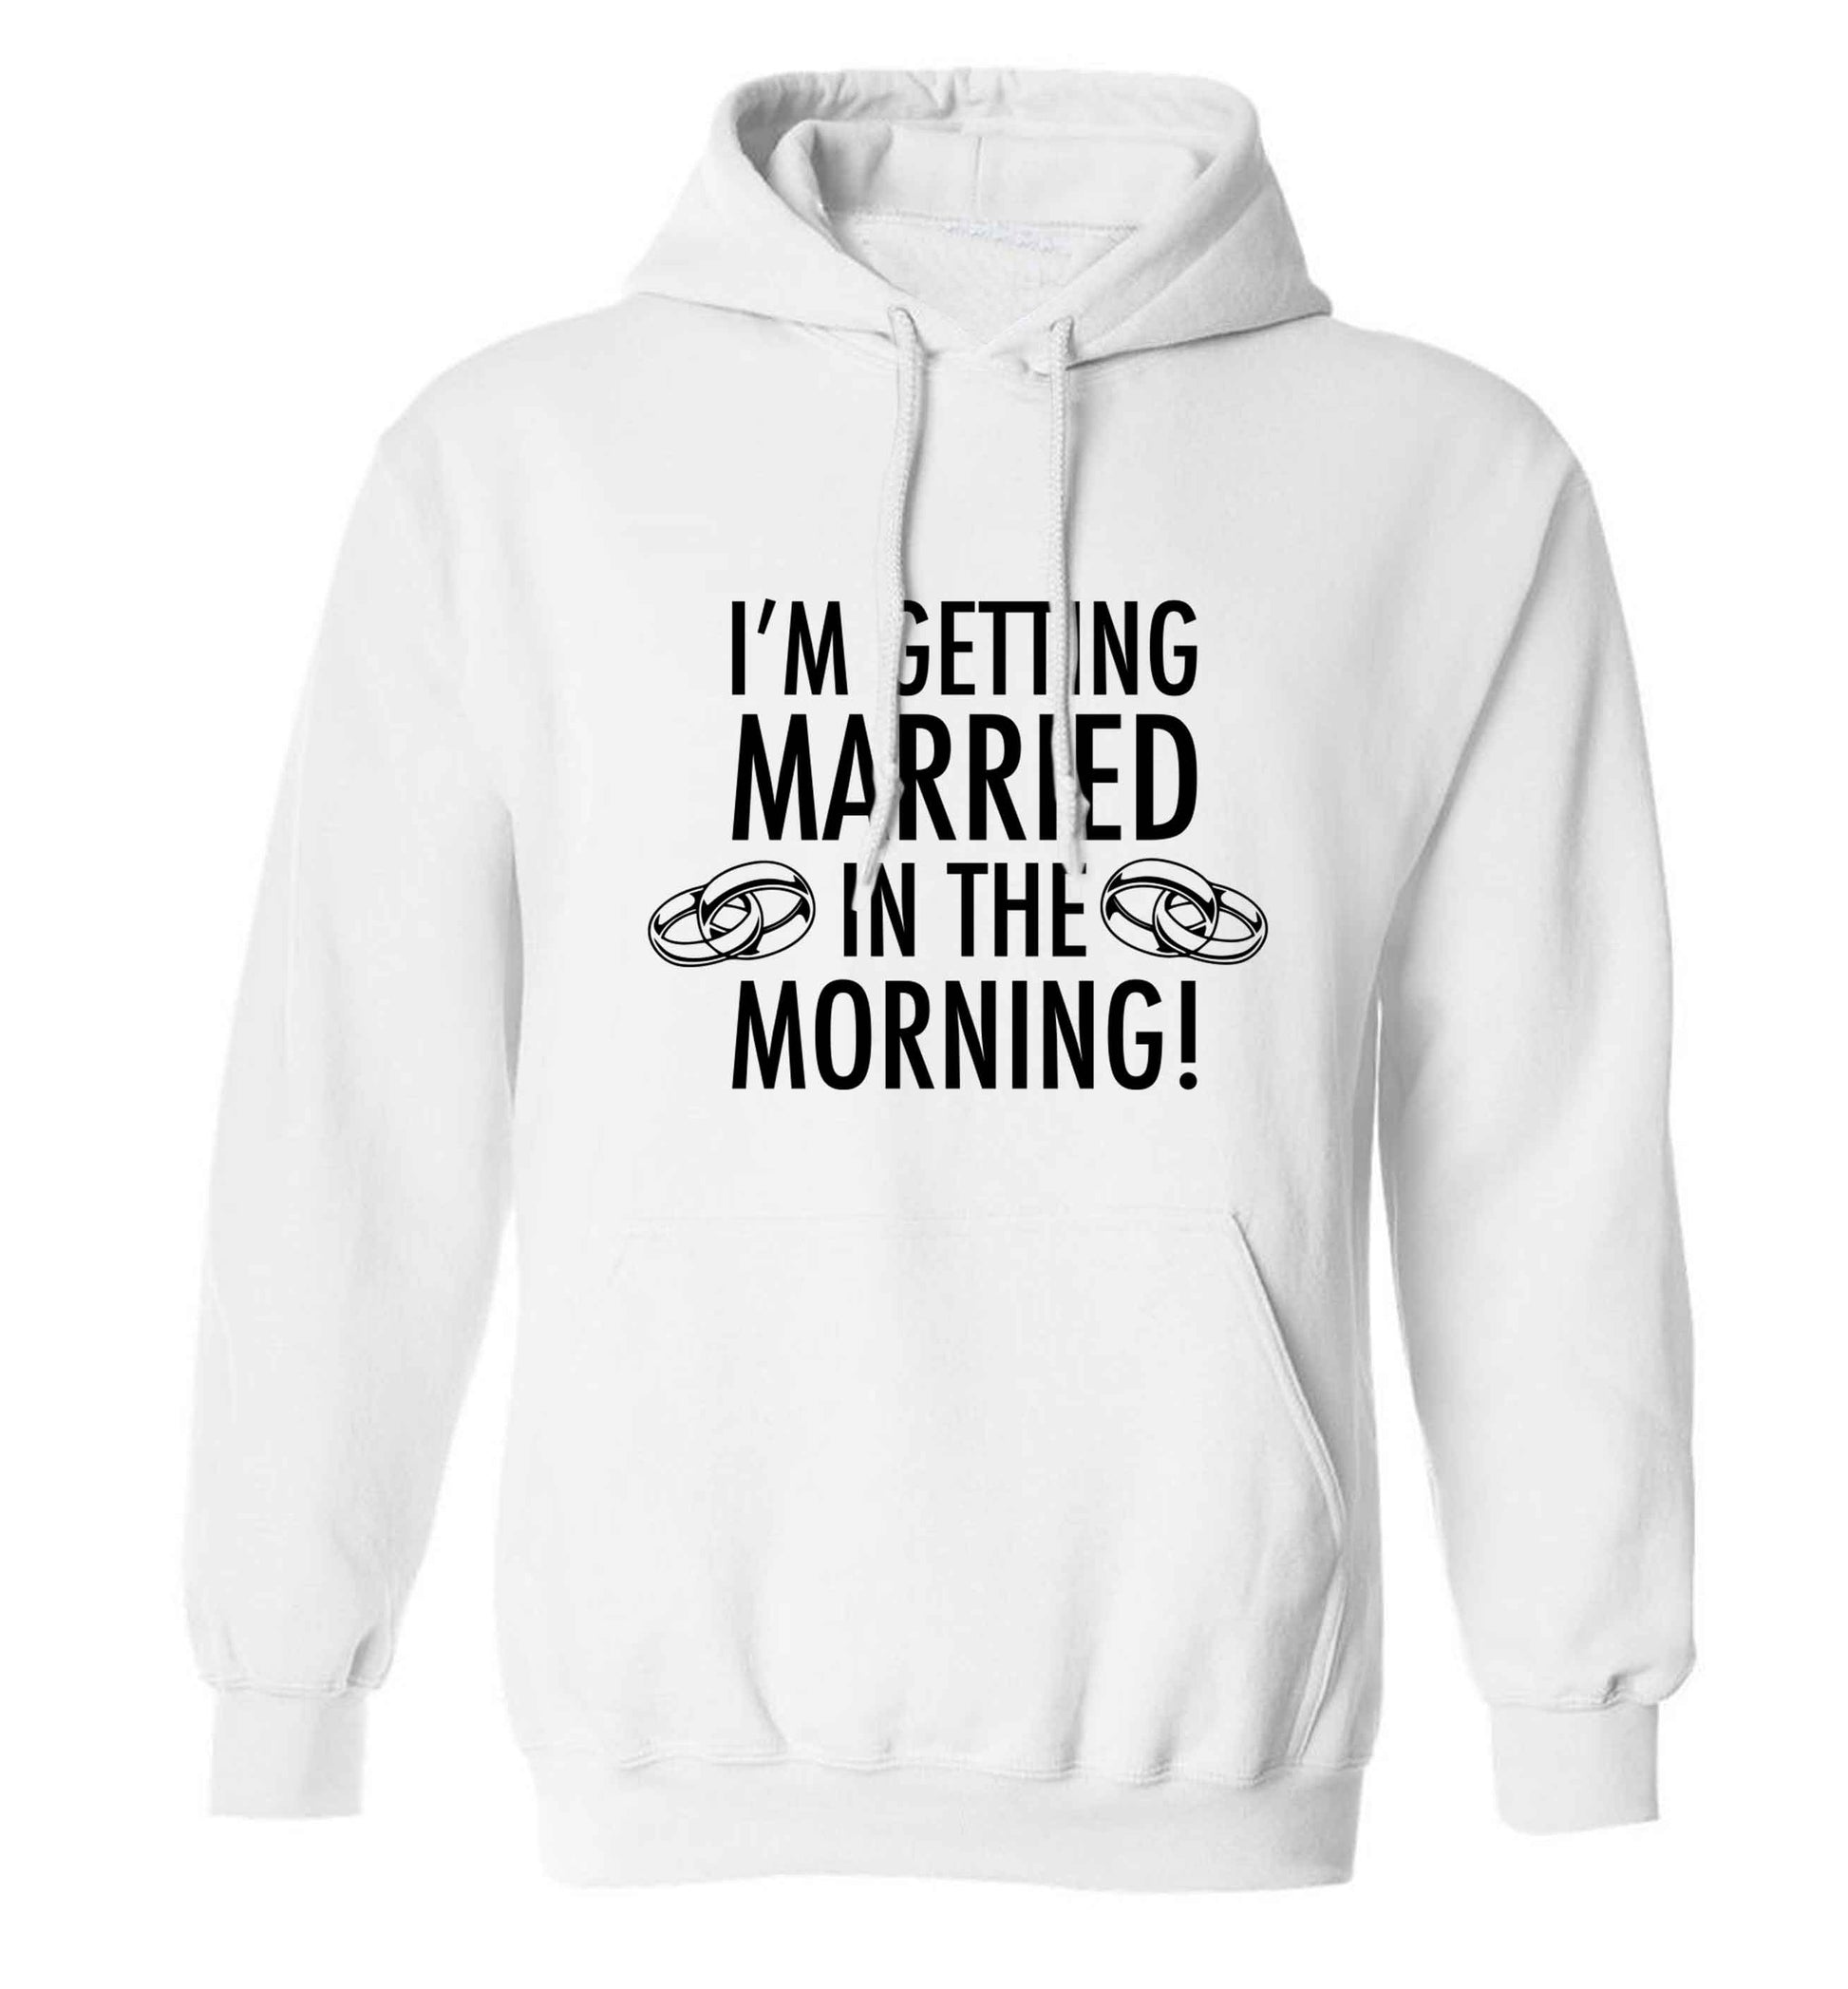 I'm getting married in the morning! adults unisex white hoodie 2XL